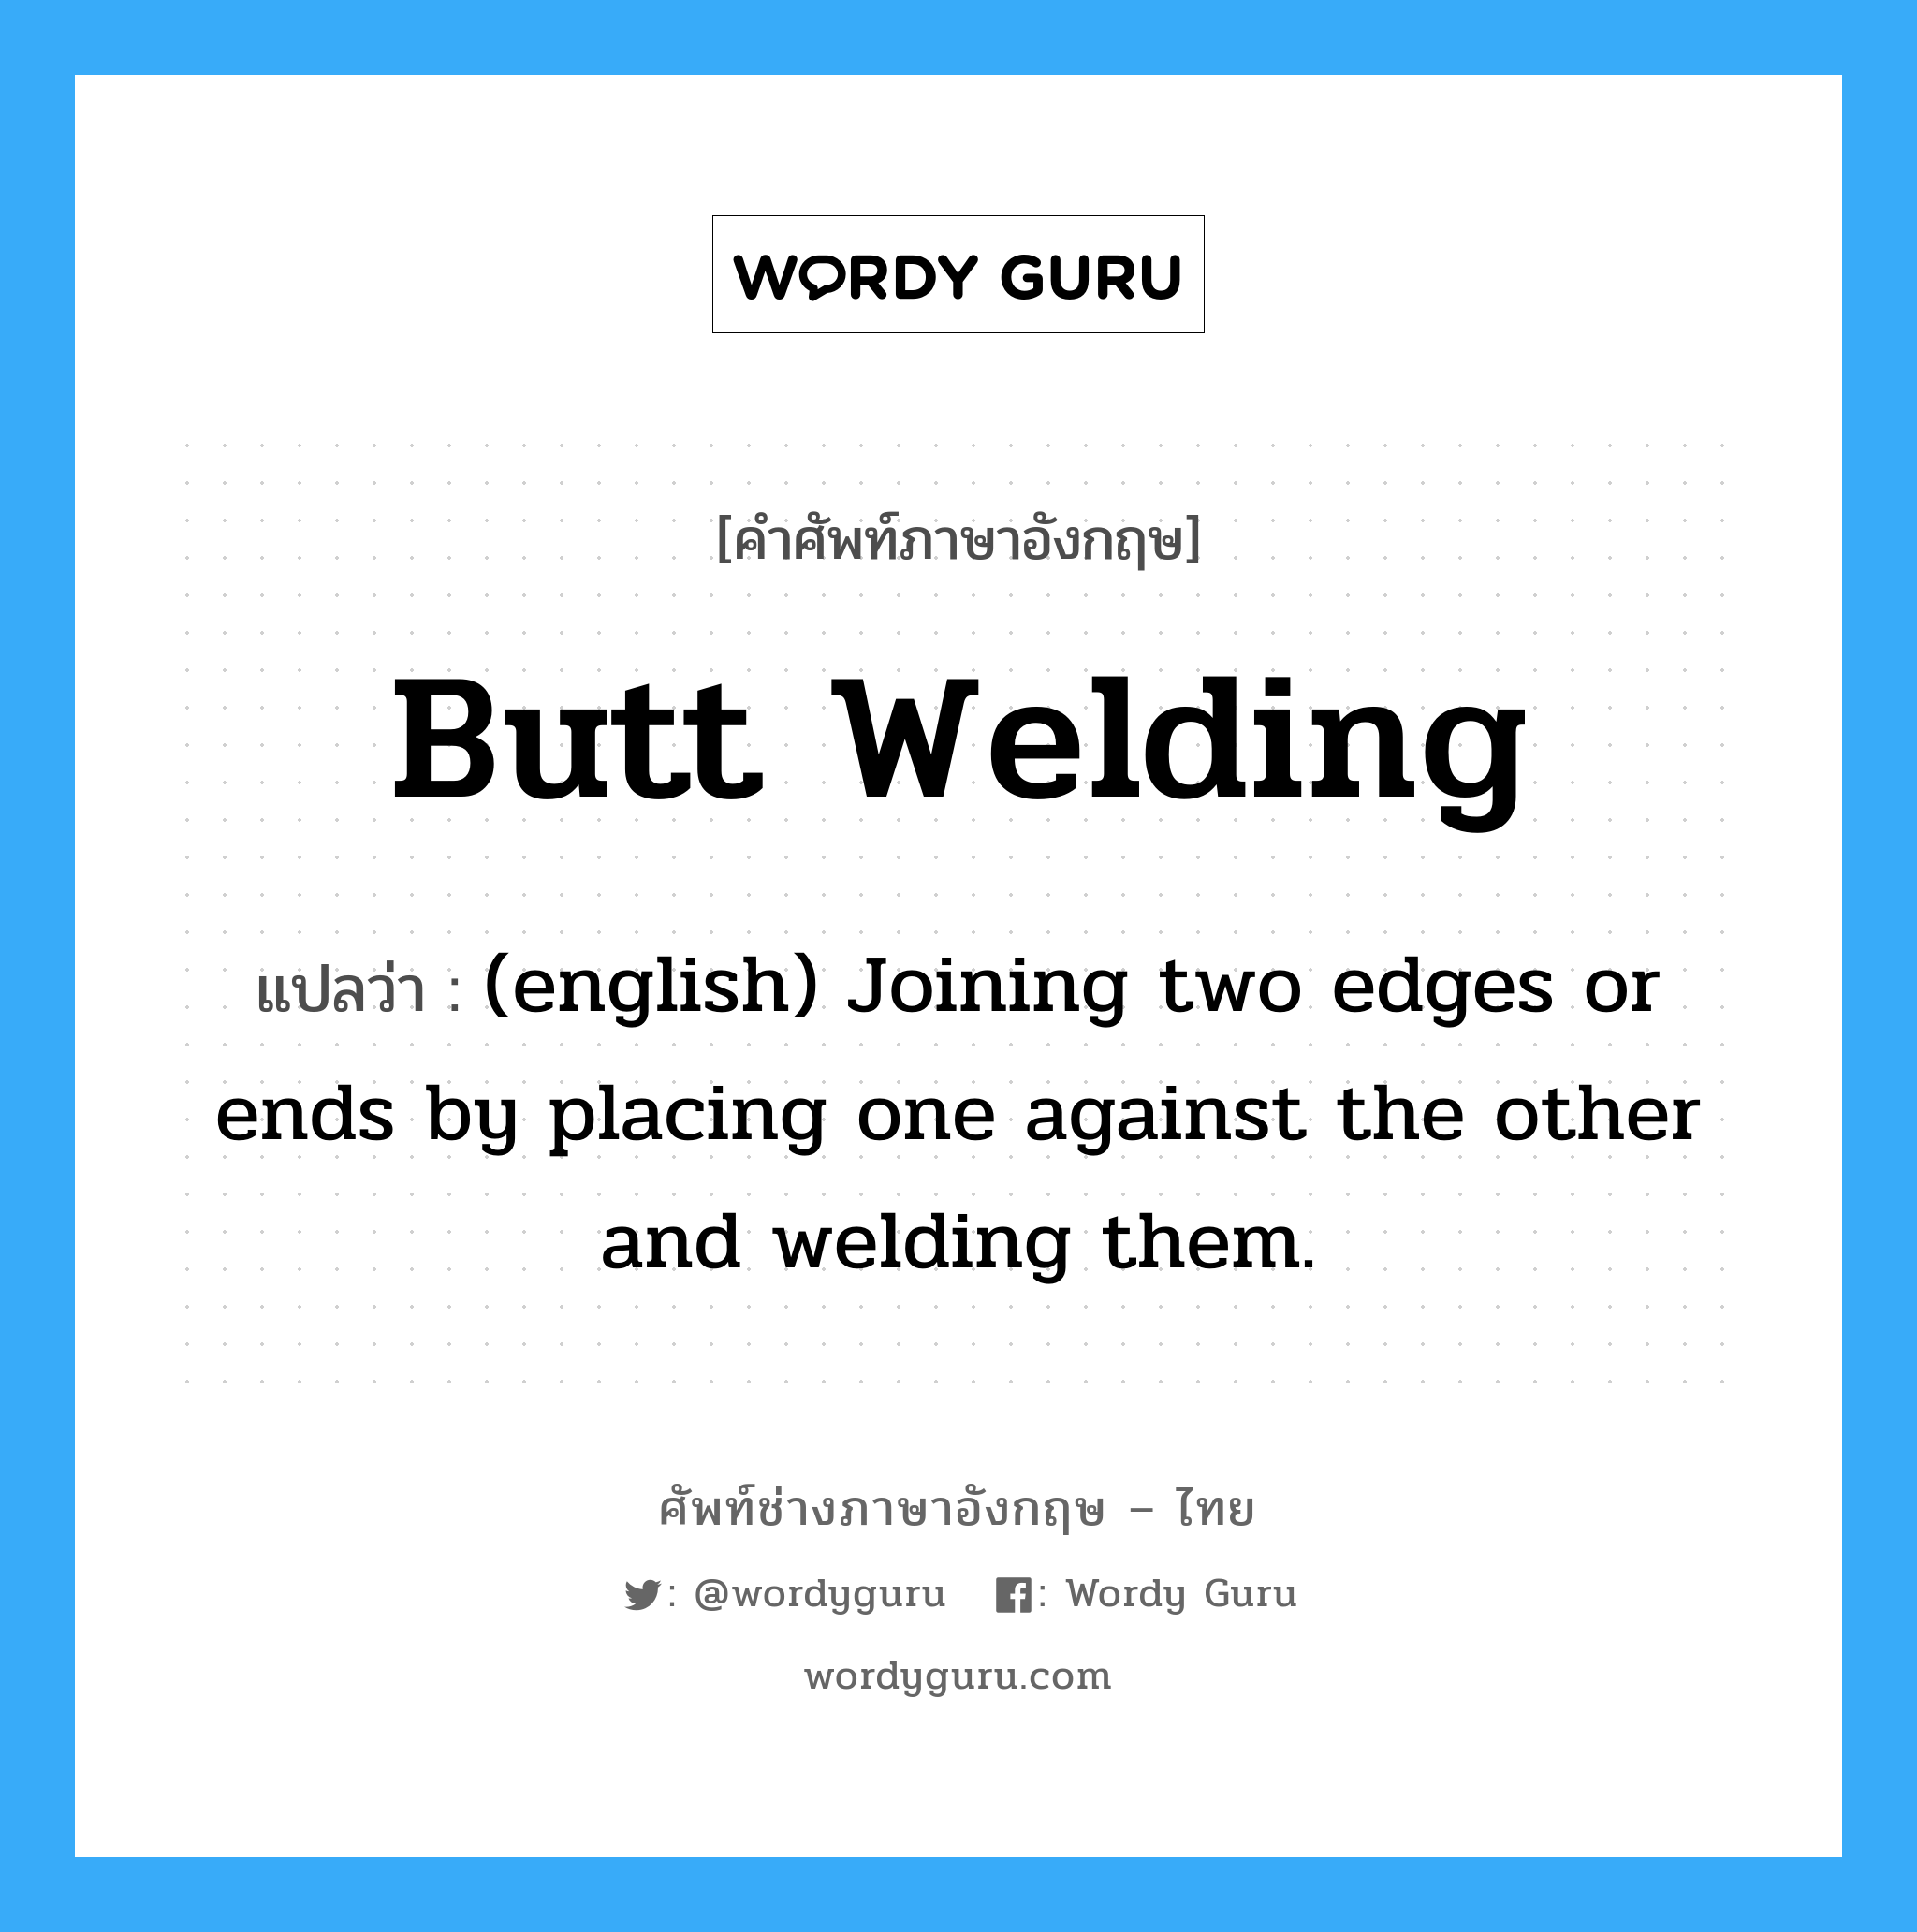 (english) Joining two edges or ends by placing one against the other and welding them. ภาษาอังกฤษ?, คำศัพท์ช่างภาษาอังกฤษ - ไทย (english) Joining two edges or ends by placing one against the other and welding them. คำศัพท์ภาษาอังกฤษ (english) Joining two edges or ends by placing one against the other and welding them. แปลว่า Butt Welding